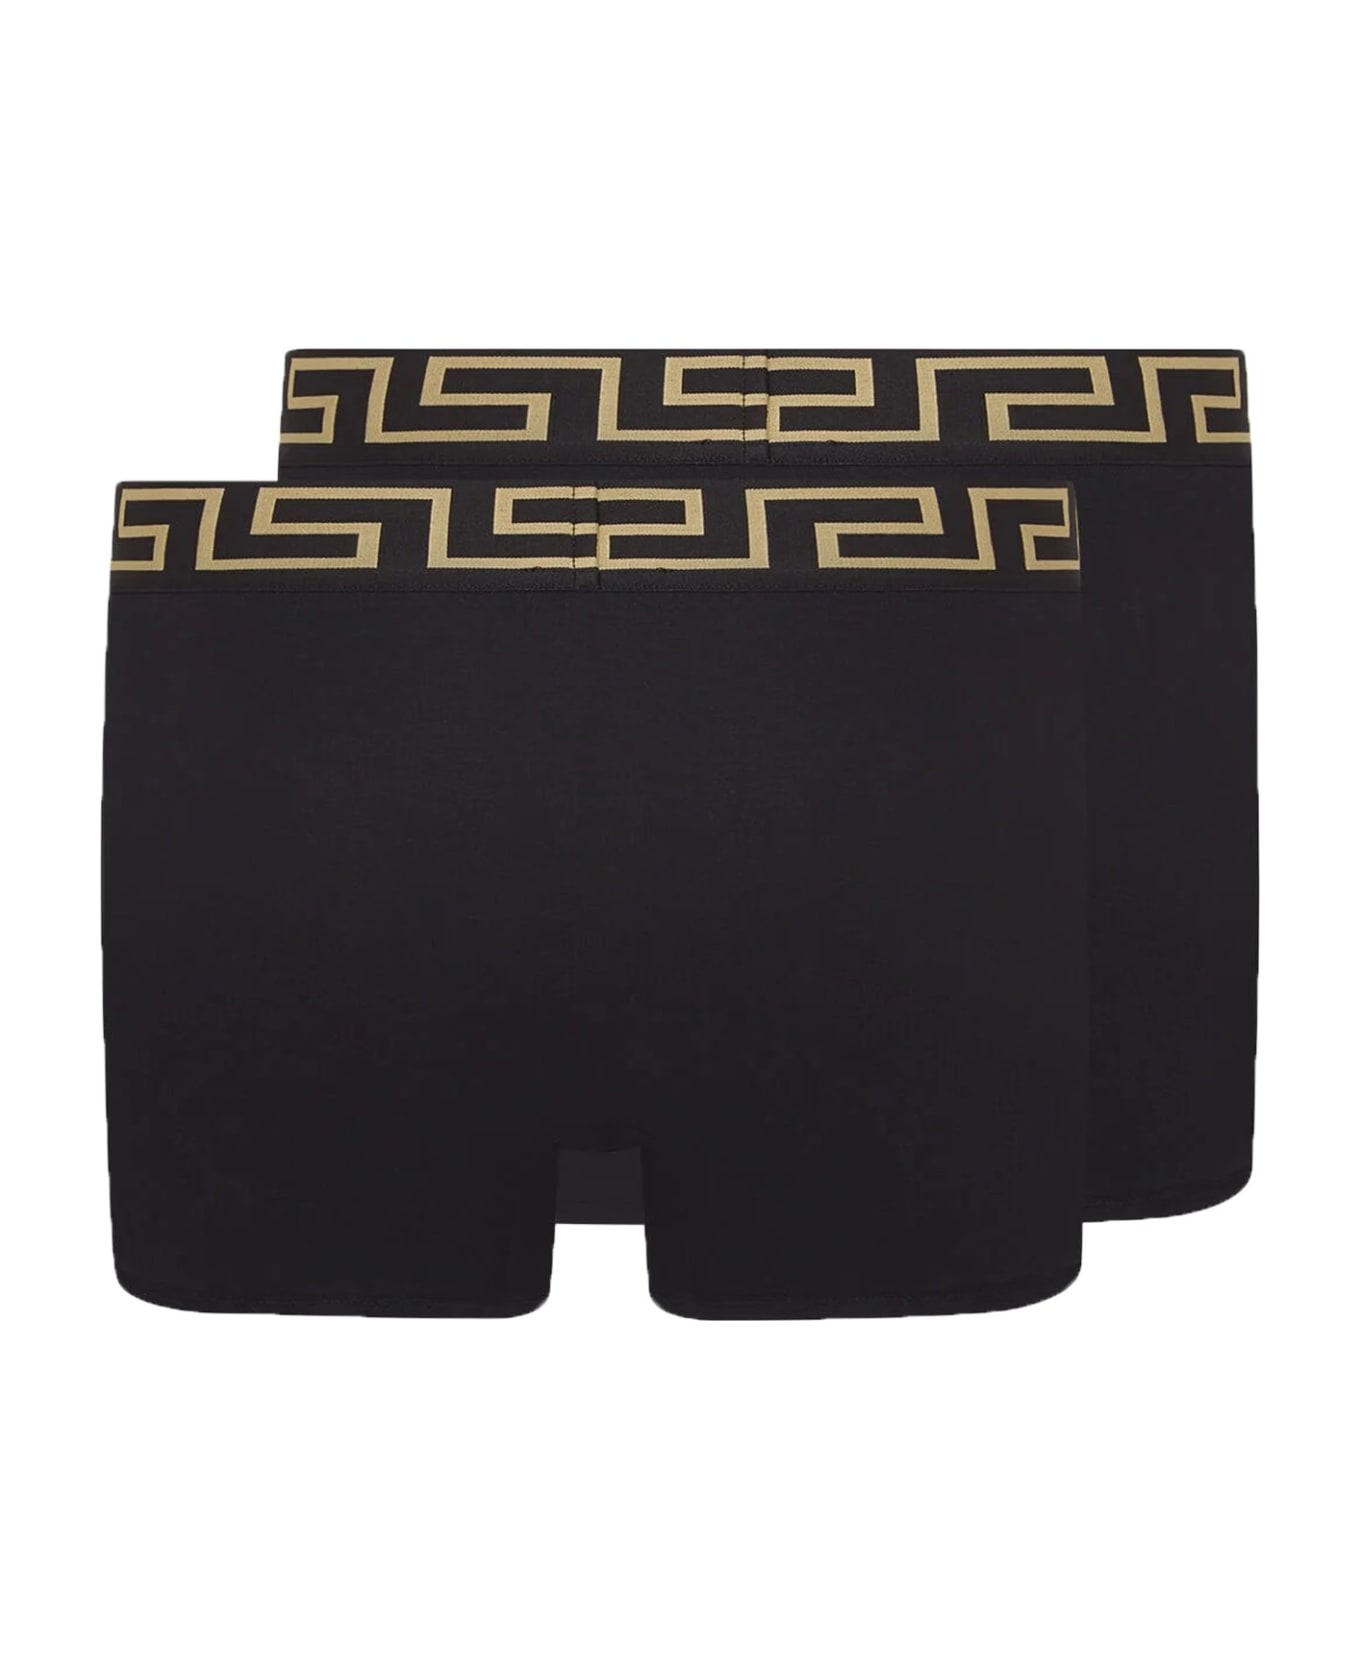 Versace Pack Of Two Boxer Shorts With Greek Motif - NERO GRECA ORO